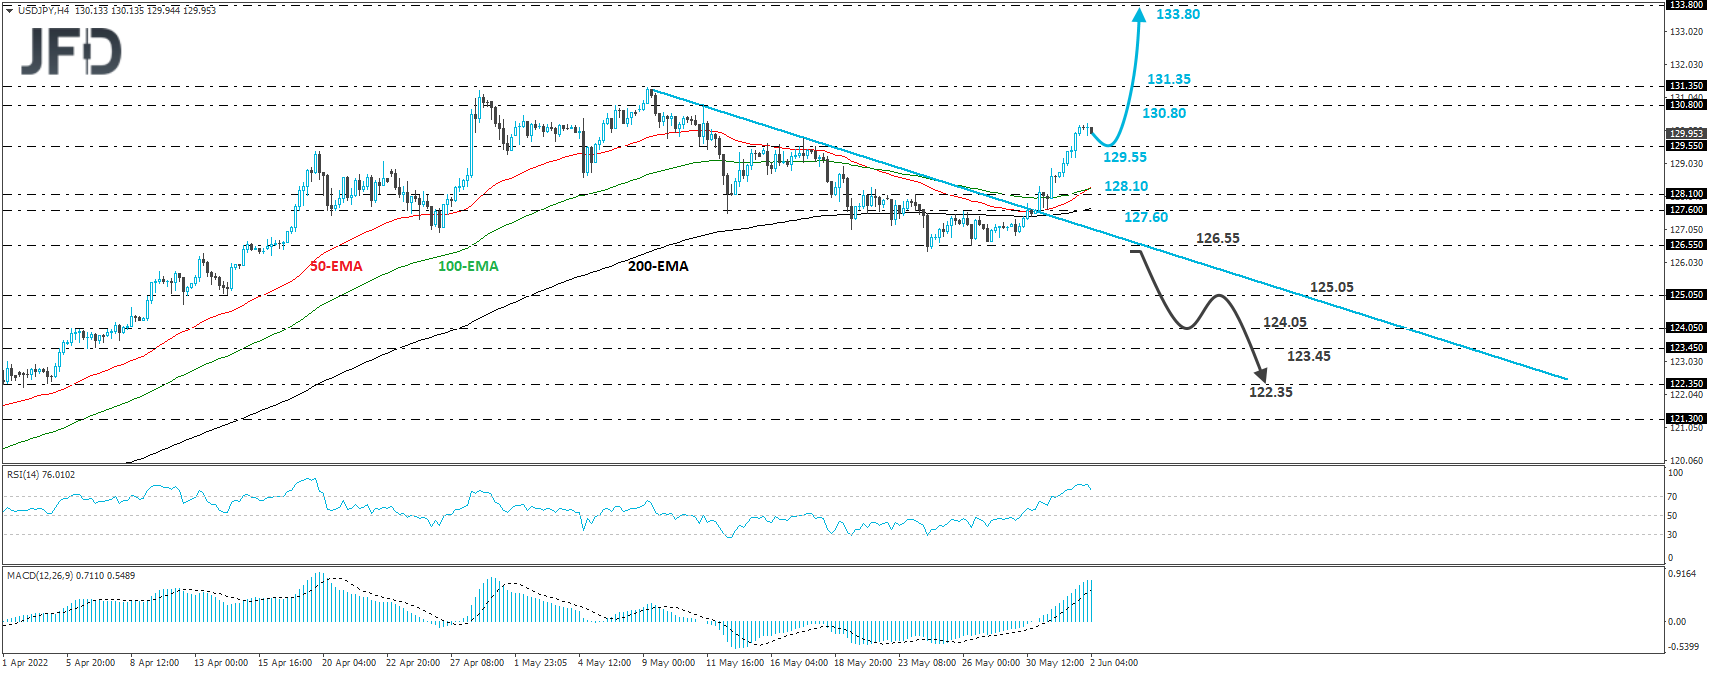 Technical analysis of the USD/CAD 4-hour chart.